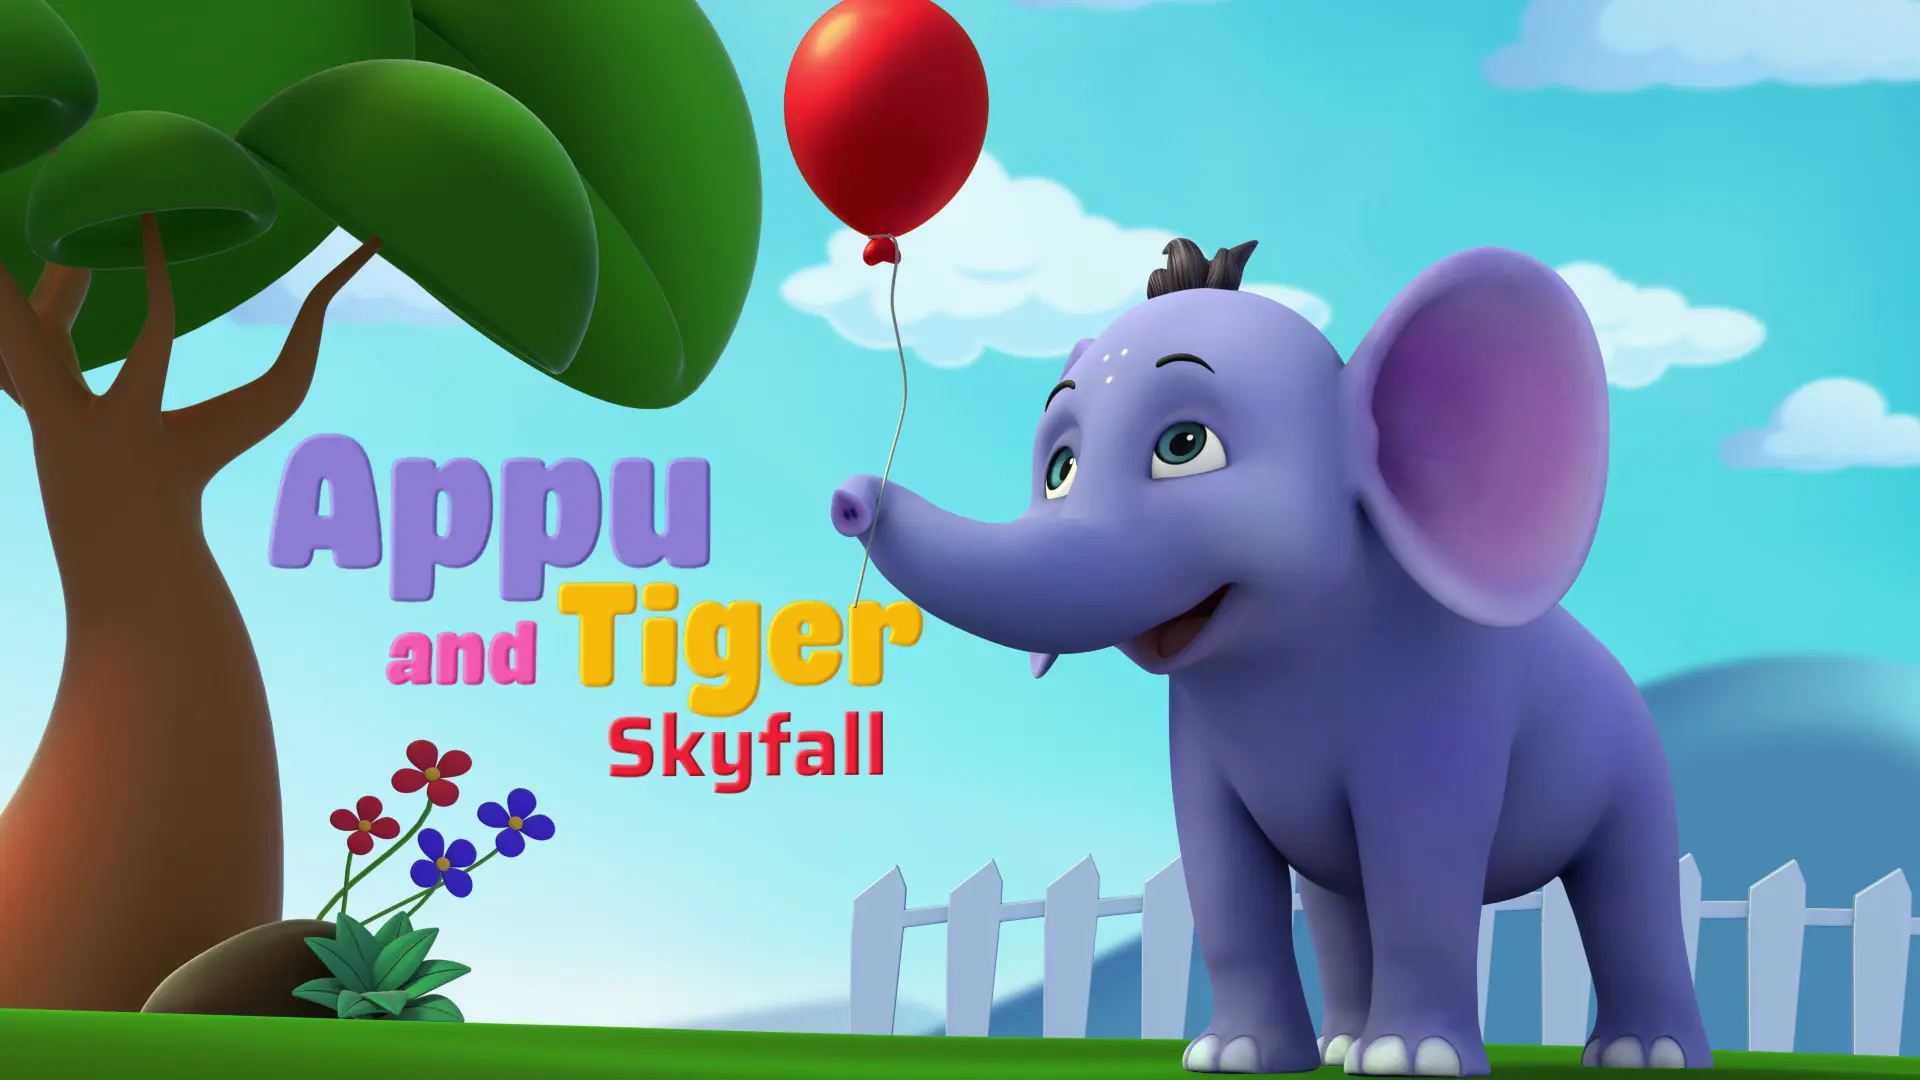 Screenshot from : Appu and Tiger - Skyfall